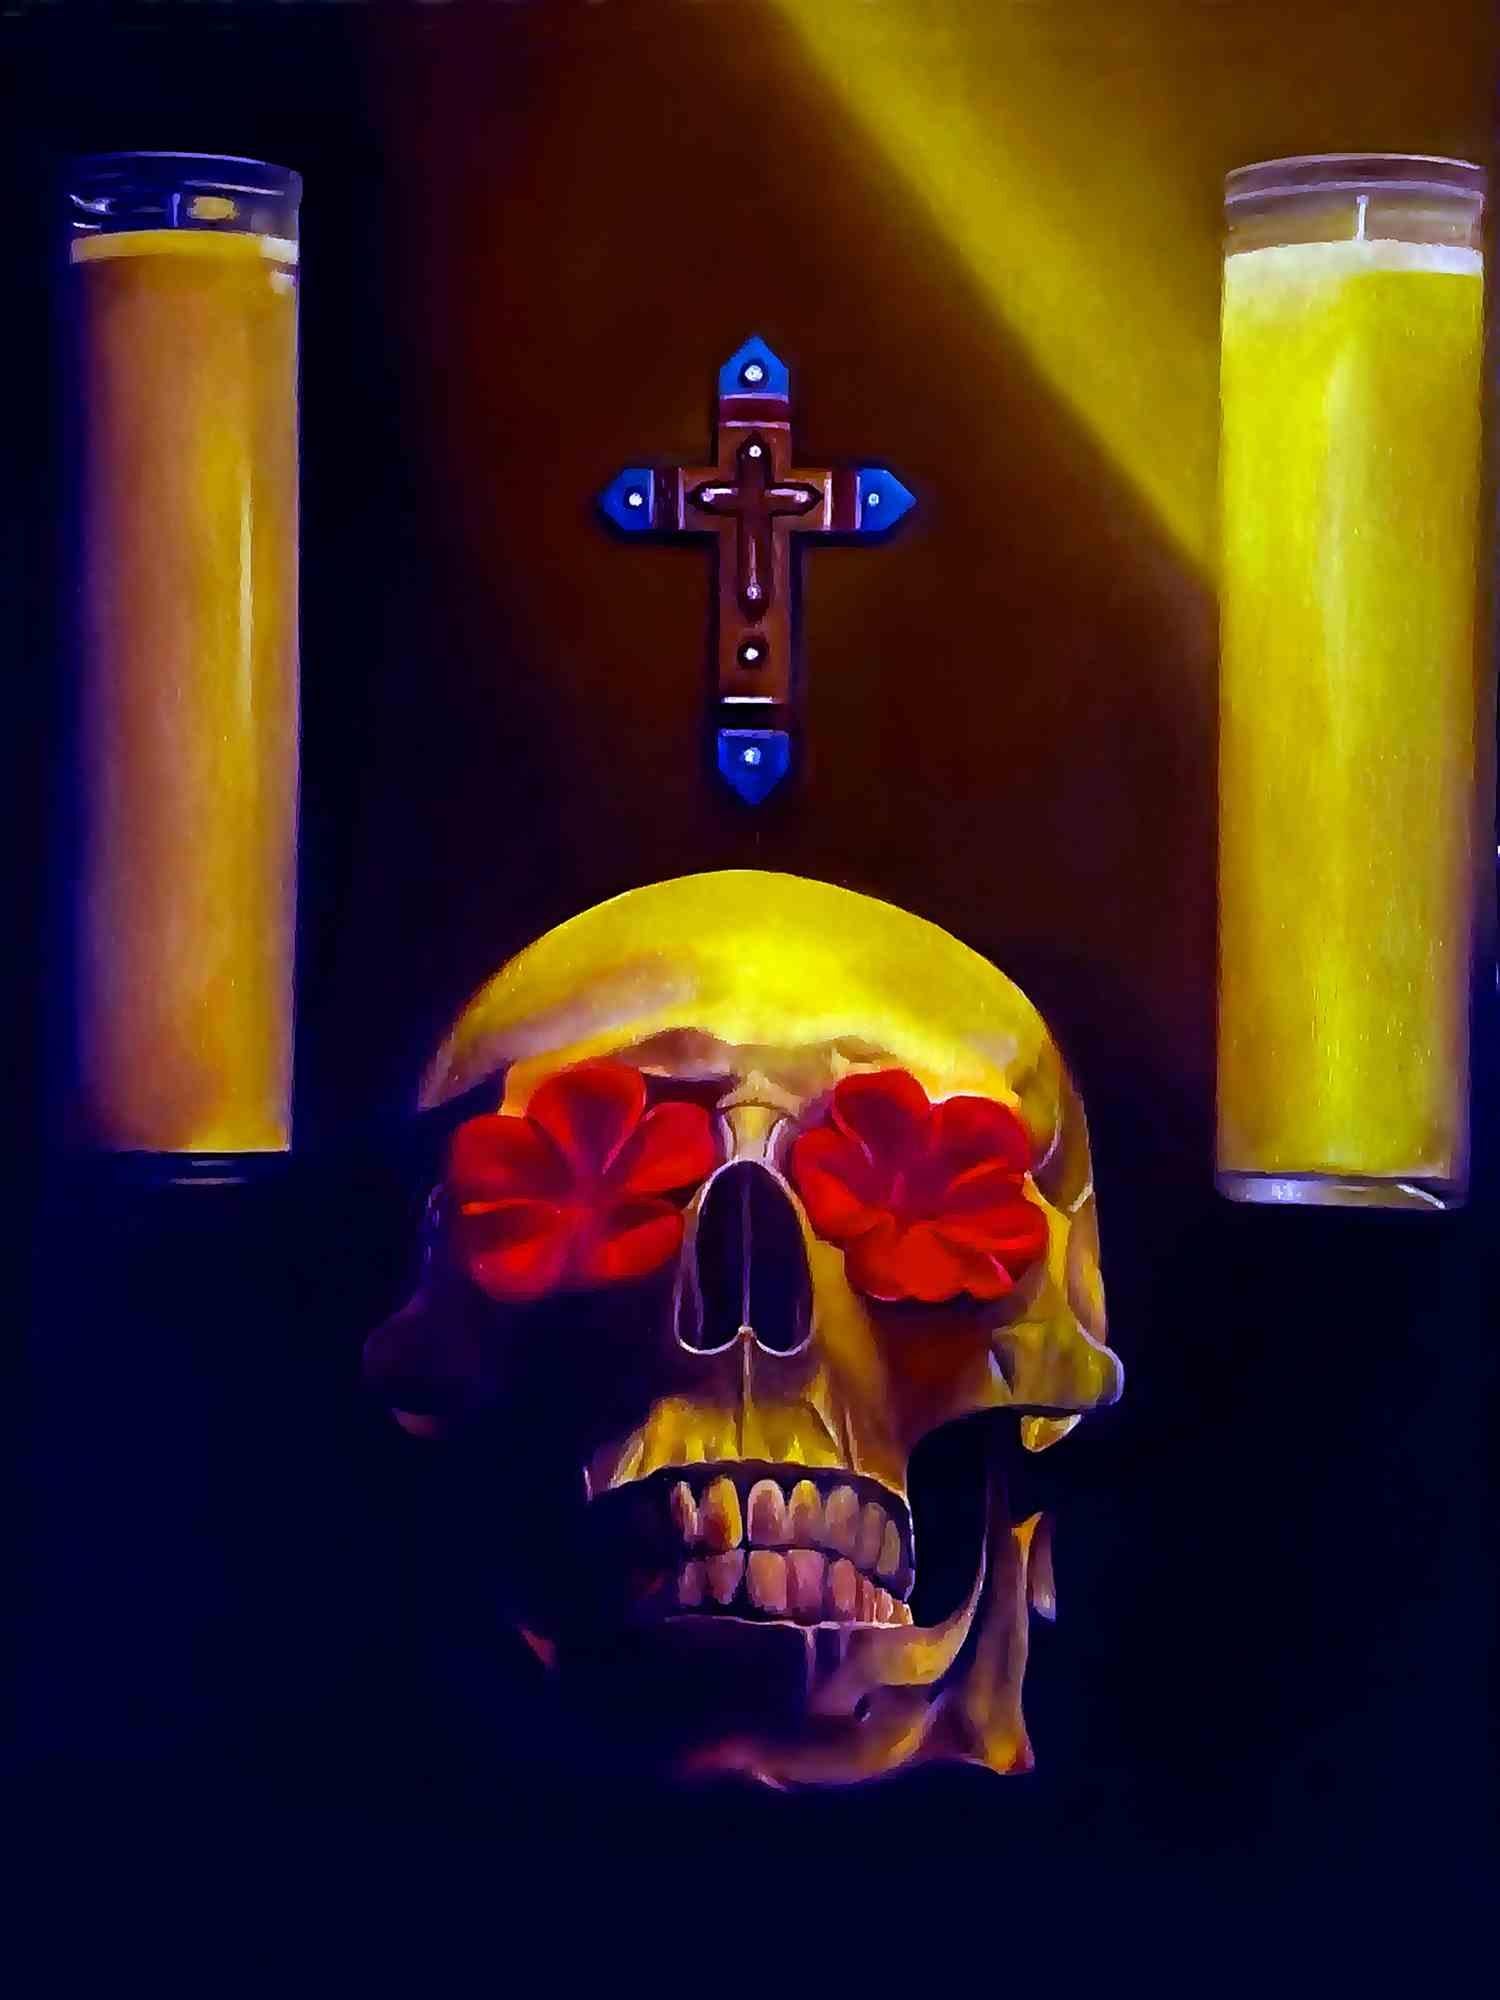 Artist Emmett Graham.  Inspired by Dia De Los Muertos. It is said , people die three deaths. The first death is the body. The second is the burial. The third death occurs when no one is left to remember us. The celebration of Día De Los Muertos is